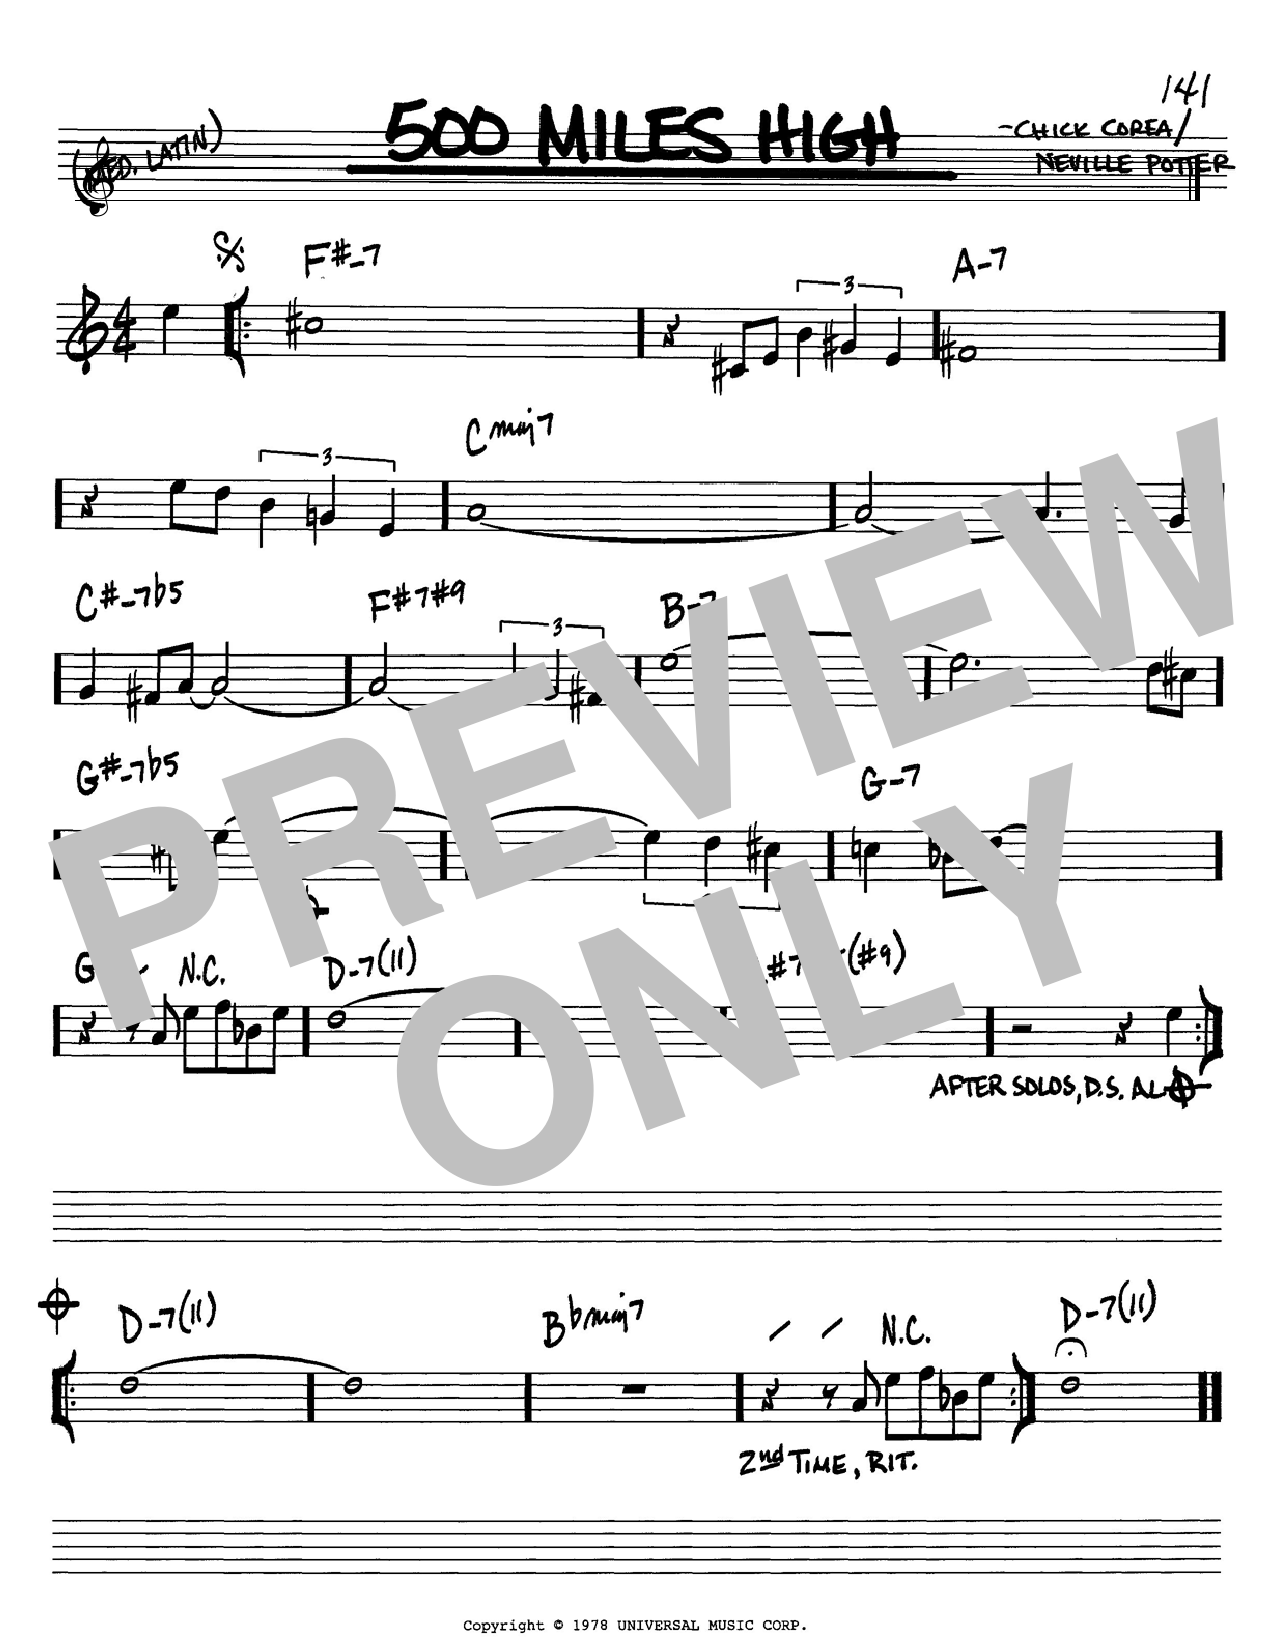 Chick Corea 500 Miles High Sheet Music Pdf Notes Chords Jazz Score Real Book Melody Chords Download Printable Sku 61476 High quality sheet music for five hundred miles by the shadows to download in pdf and print. chick corea 500 miles high sheet music notes chords download printable real book melody chords pdf score sku 61476